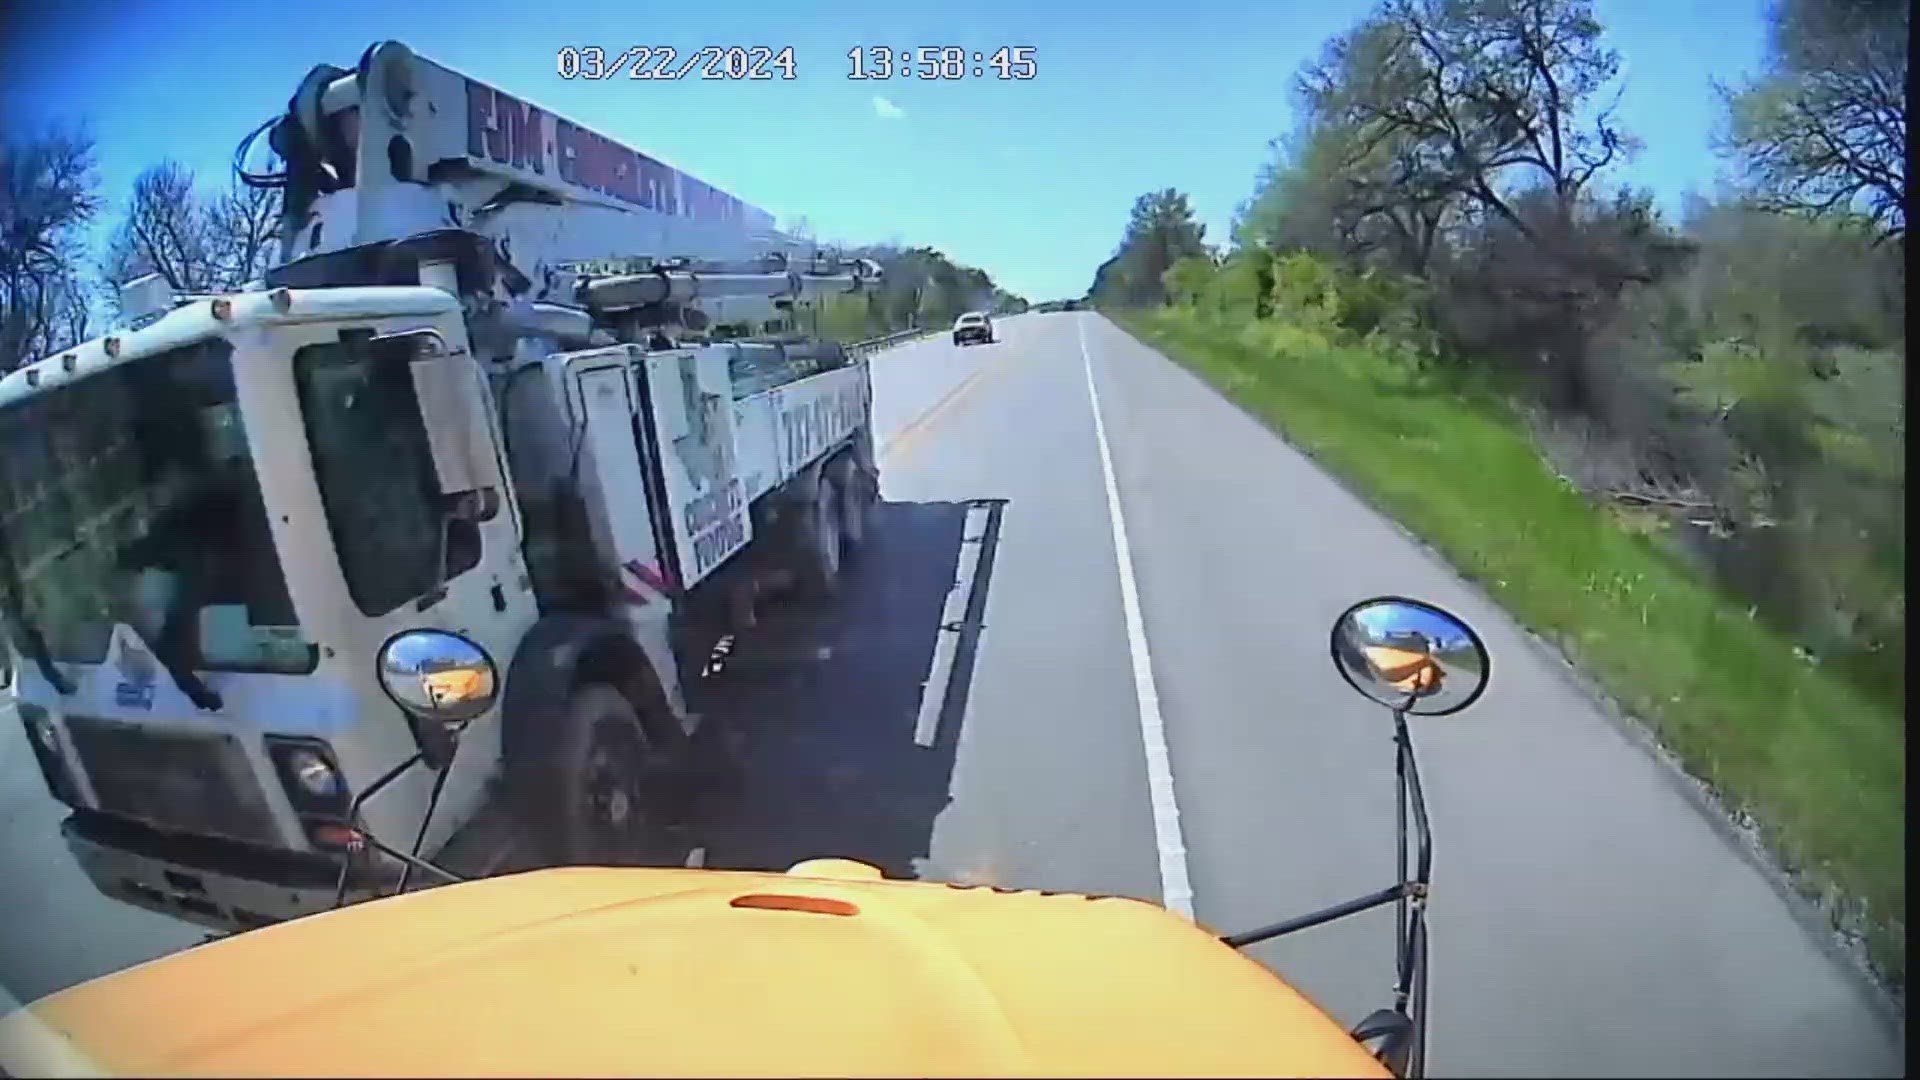 Video shows the moment cement truck crossed into wrong lane causing deadly crash with school bus